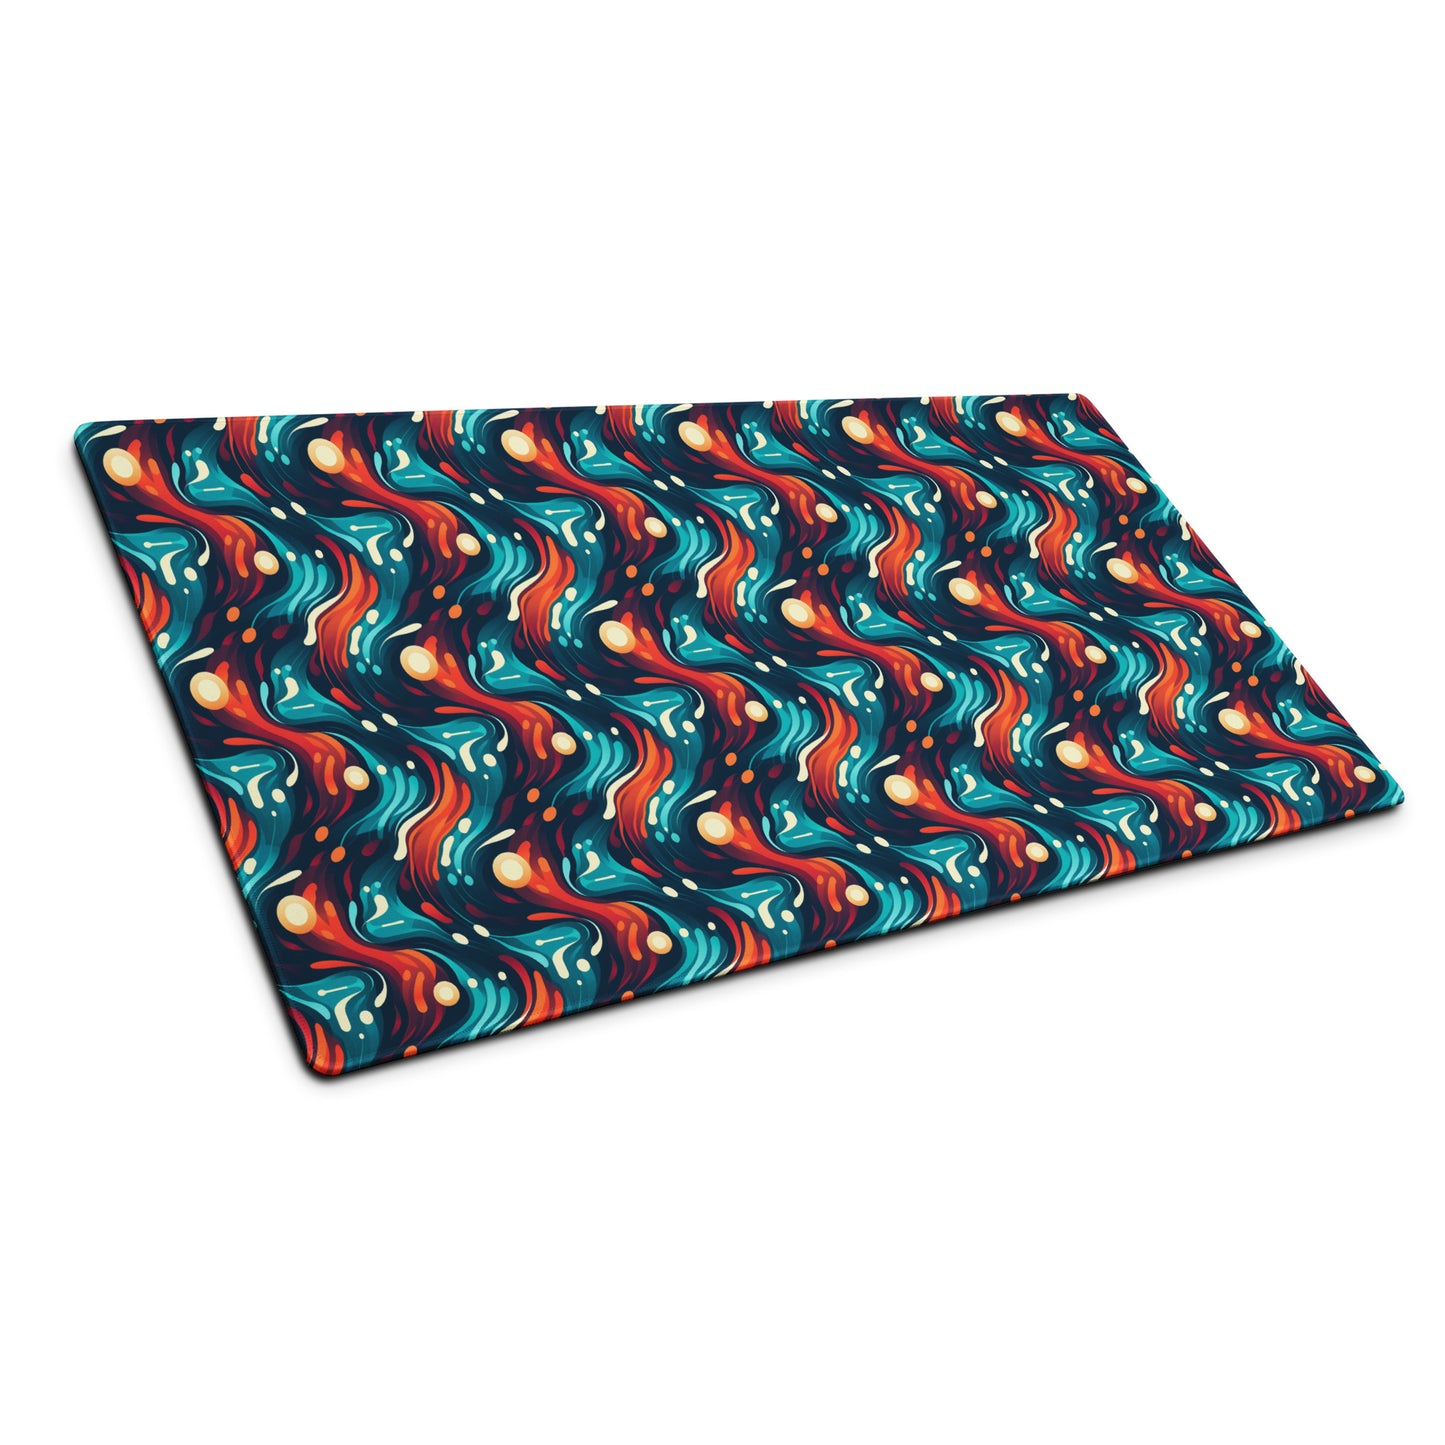 A 36" x 18" desk pad with a blue and orange wavy pattern sitting at an angle.